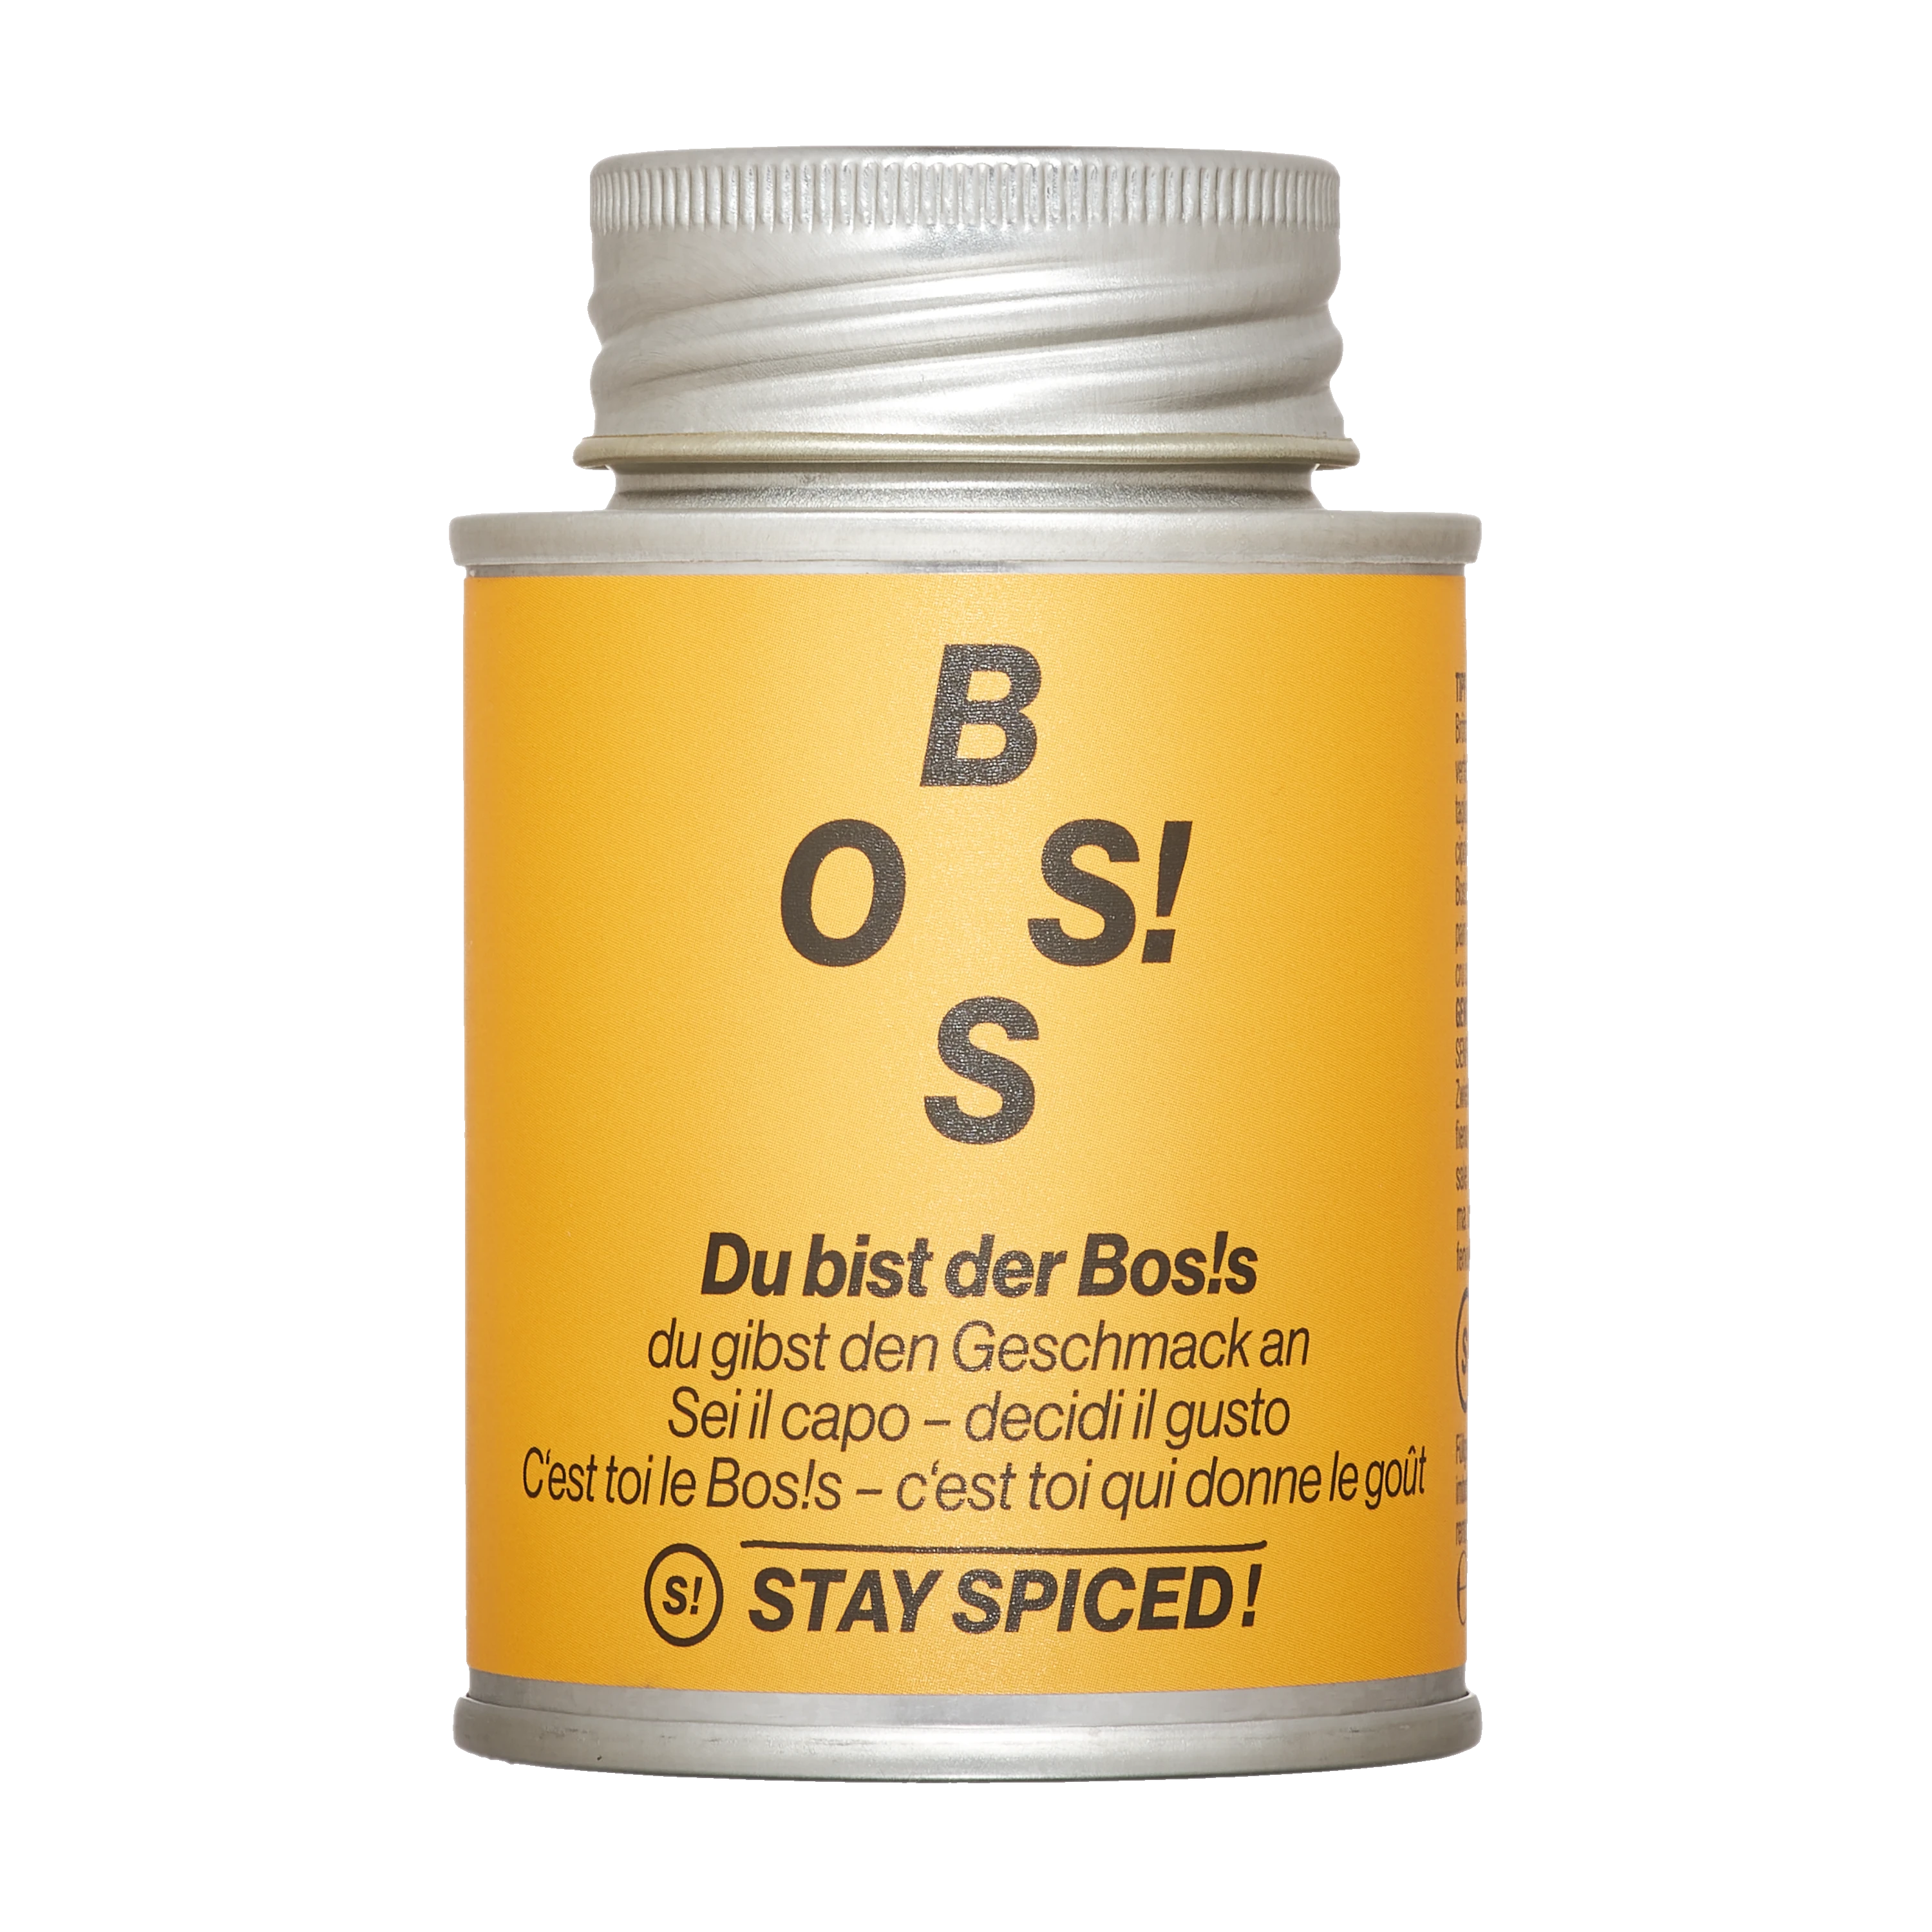 Stay Spiced BOS!S Gewürzmischung